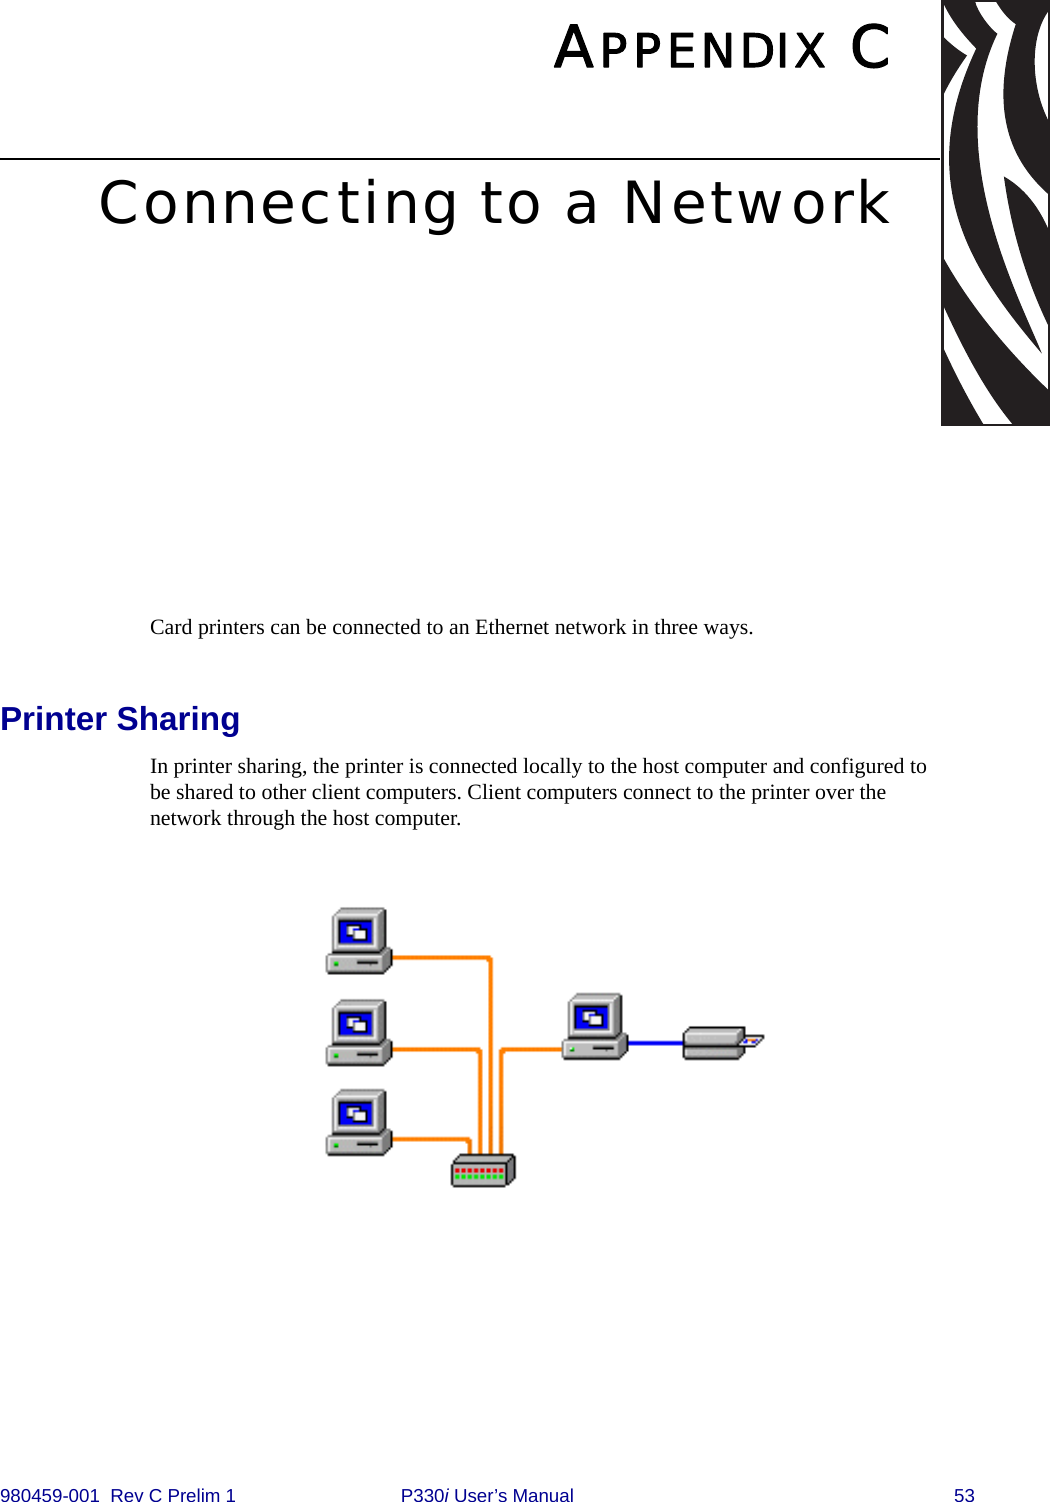 980459-001  Rev C Prelim 1 P330i User’s Manual 53APPENDIX CConnecting to a NetworkCard printers can be connected to an Ethernet network in three ways.Printer SharingIn printer sharing, the printer is connected locally to the host computer and configured to be shared to other client computers. Client computers connect to the printer over the network through the host computer.